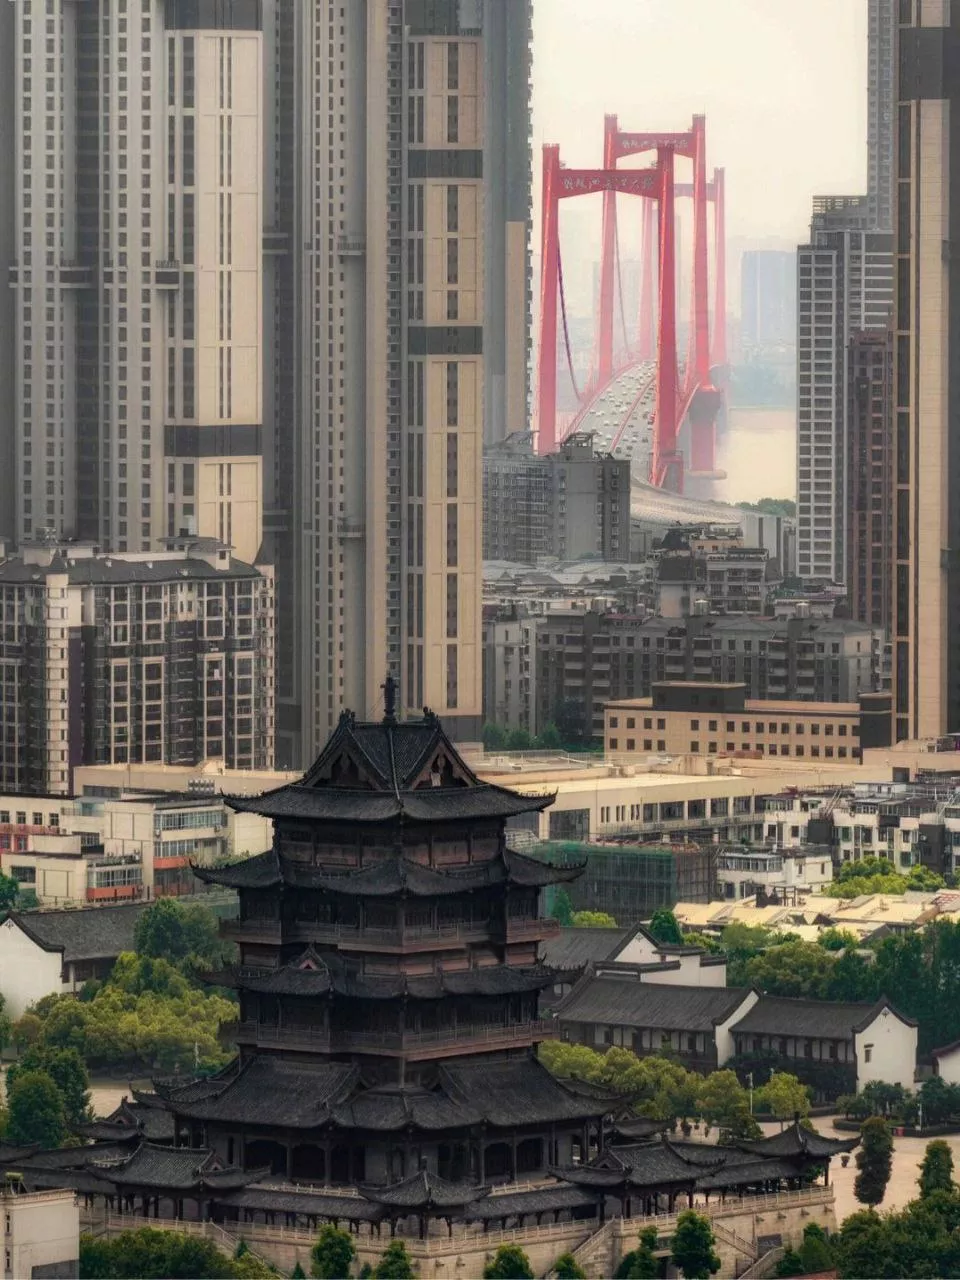 Wuhan city on Changjiang, subprovincial city and capital of Hubei province Yellow Crane Tower in Wuhan City, built in 223, burnt down in 1884, rebuilt in 1985